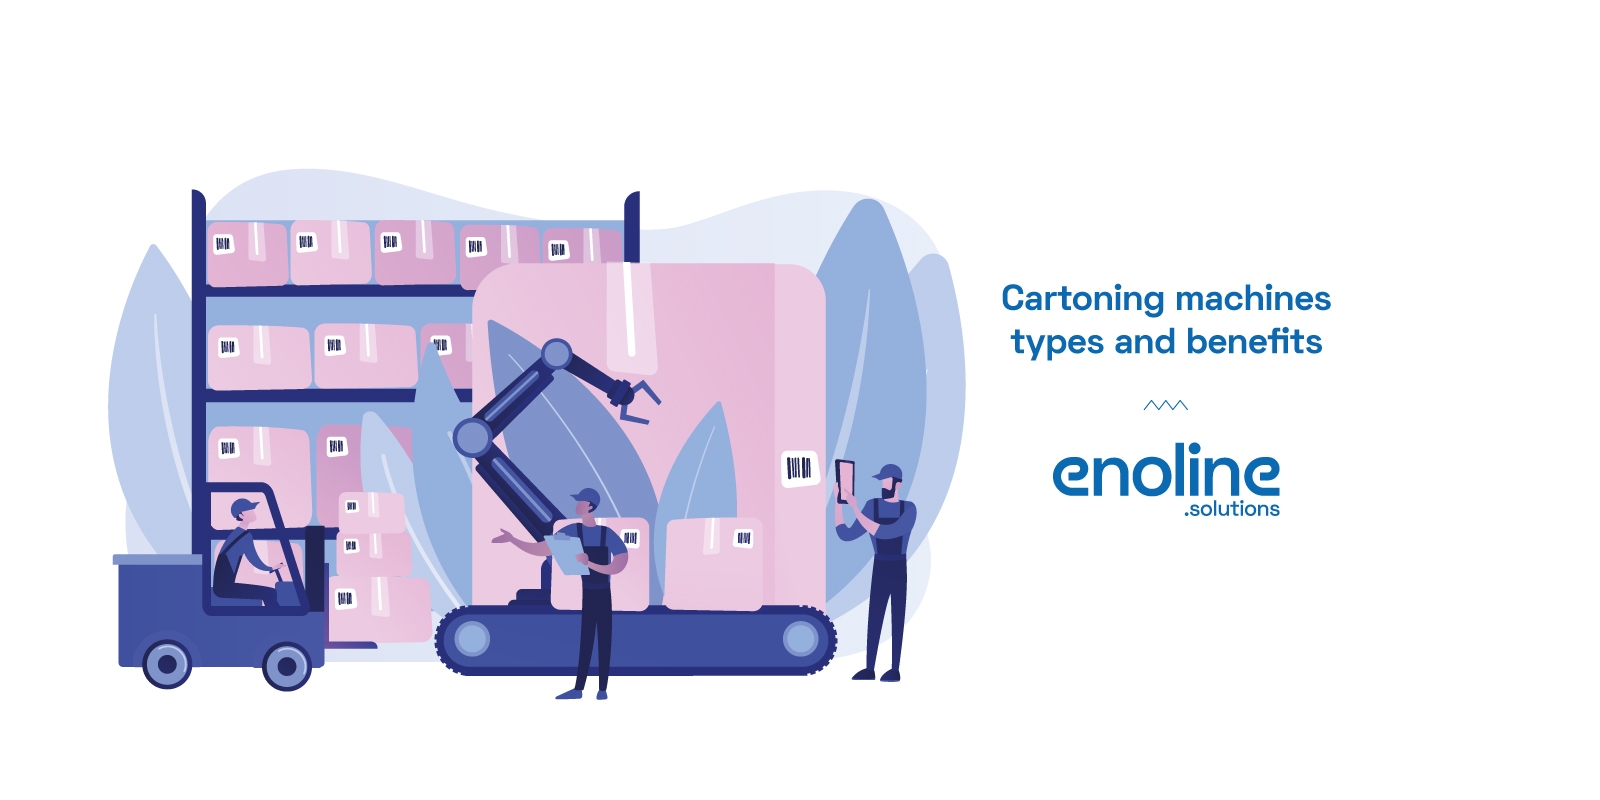 Enoline cartoning machines types and benefits